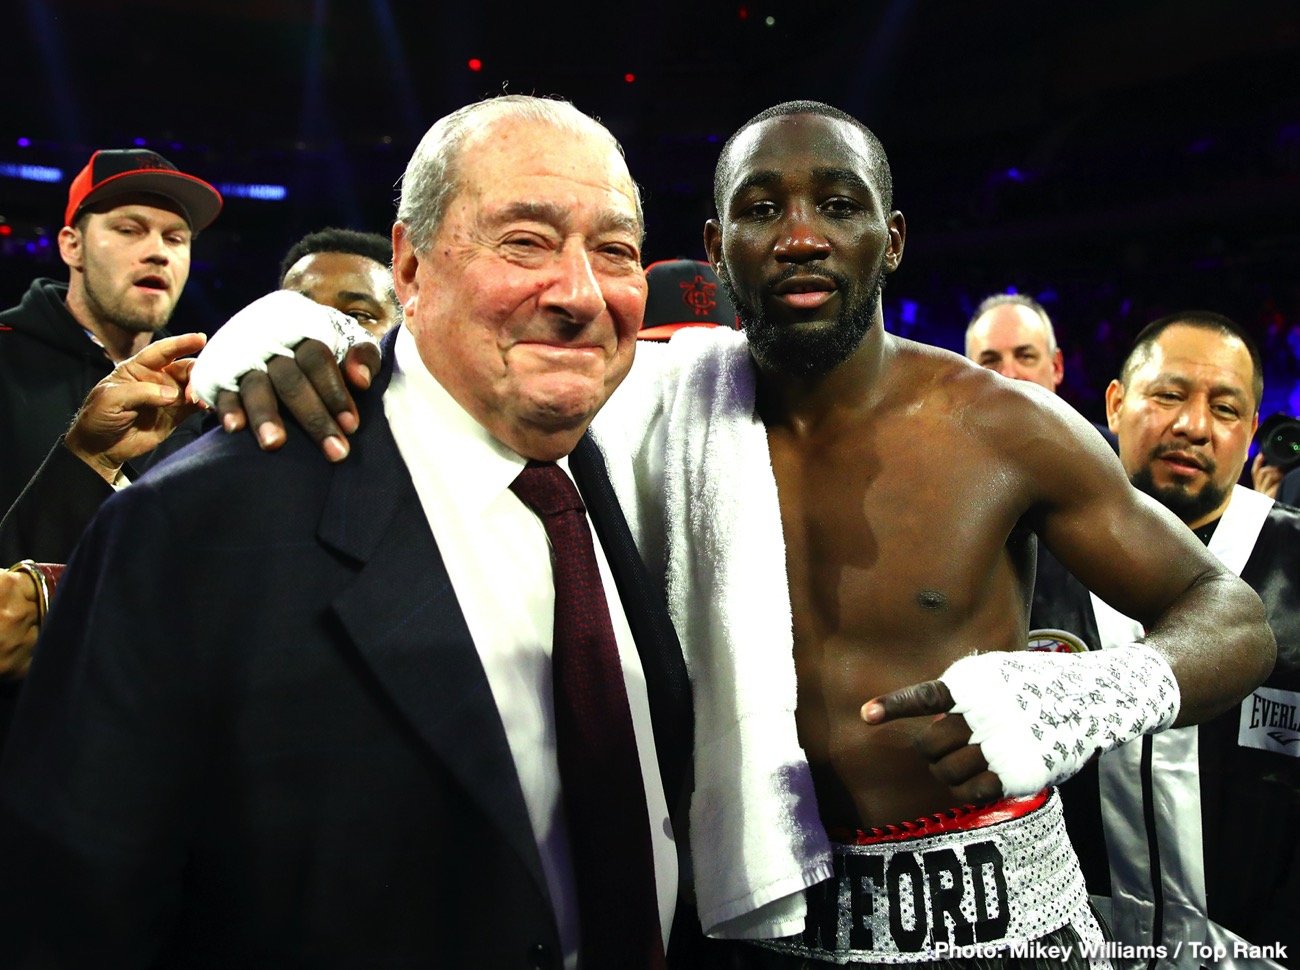 Errol Spence Jr, Terence Crawford boxing photo and news image